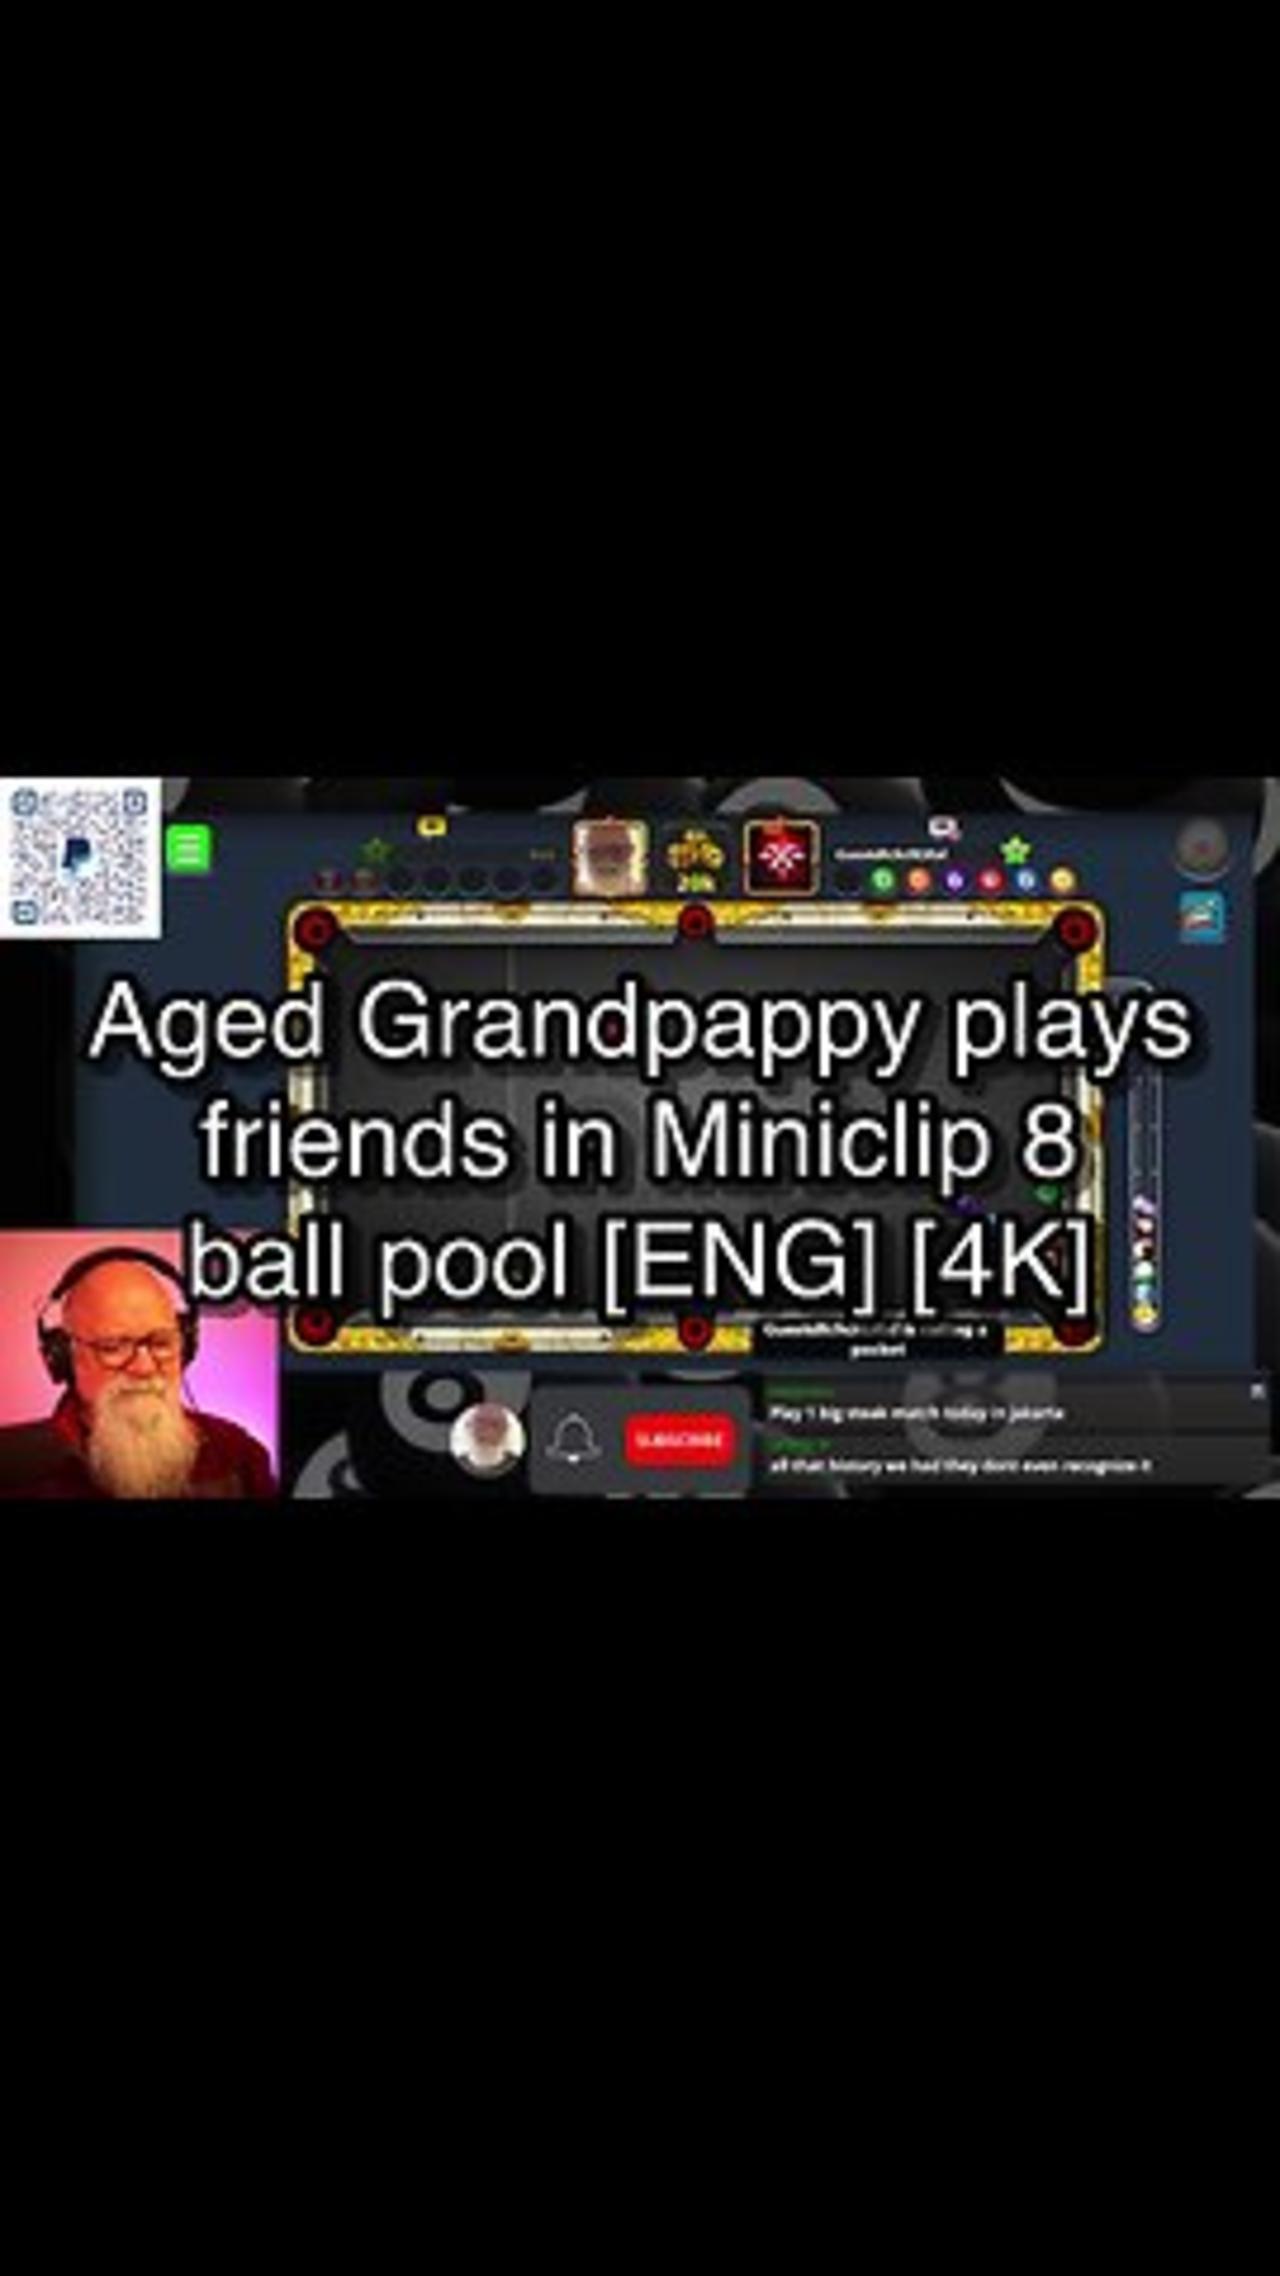 Aged Grandpappy plays friends in Miniclip 8 ball pool [ENG] [4K] 🎱🎱🎱 8 Ball Pool 🎱🎱🎱